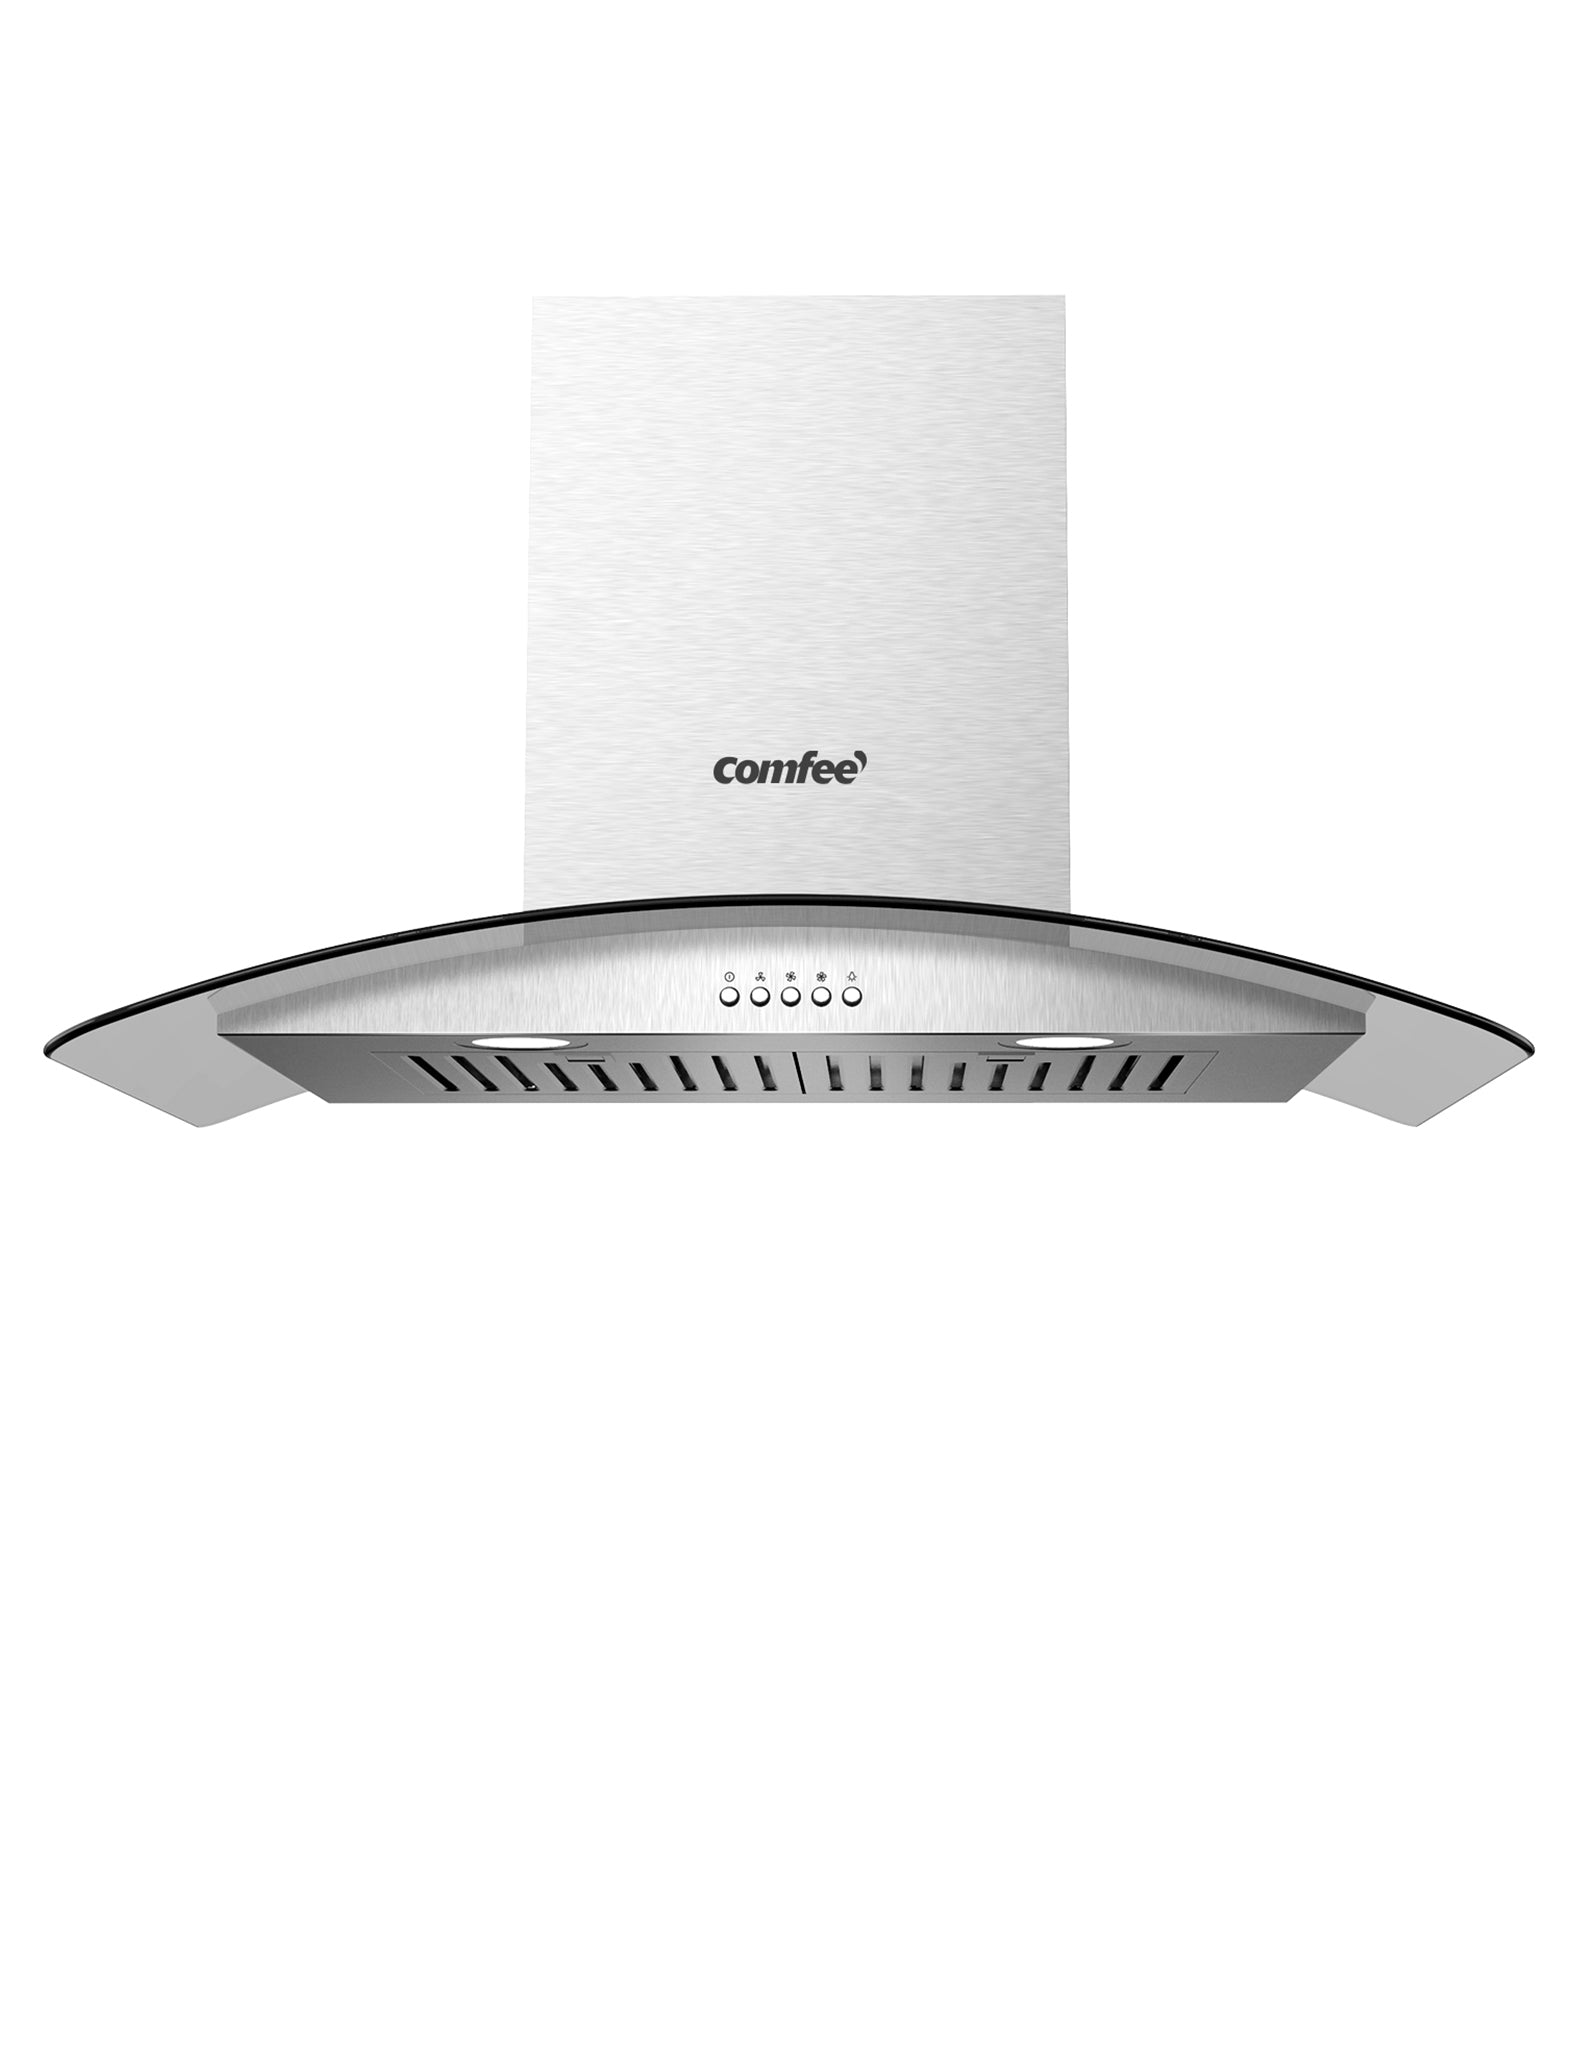 Comfee F13 Range Hood 30 Inch Ducted Ductless Vent Hood Durable